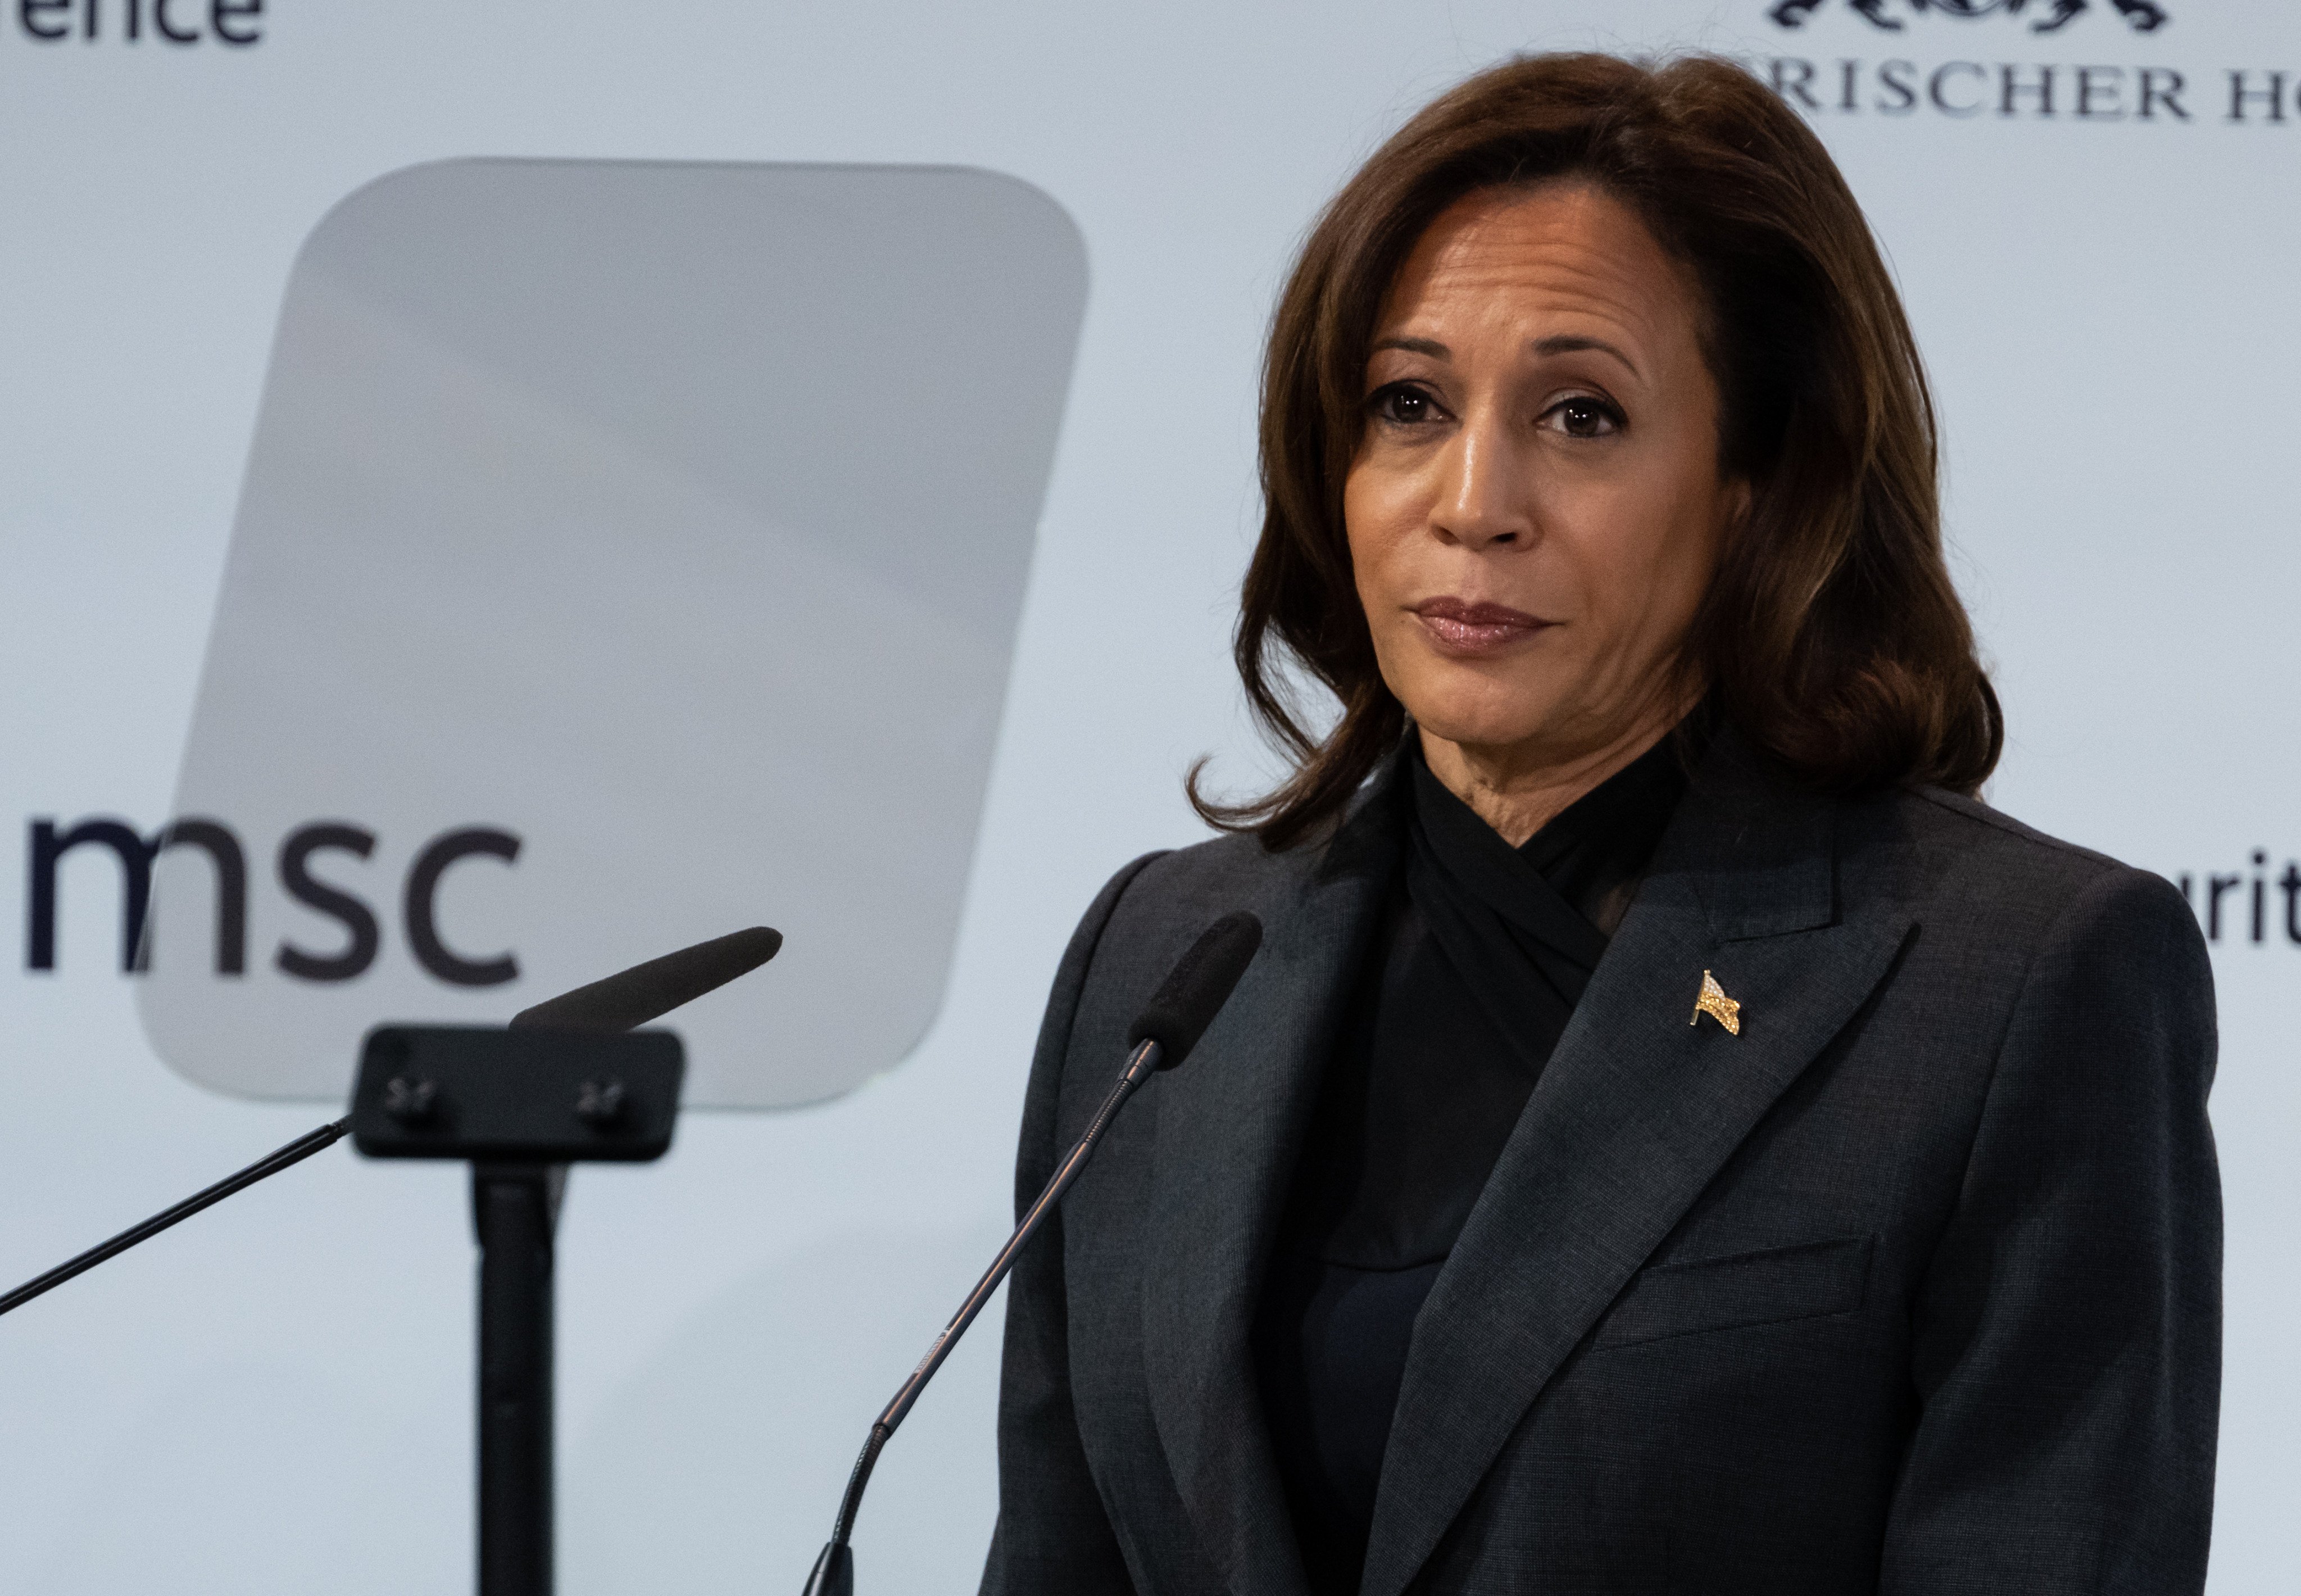 US Vice-President Kamala Harris speaks at the Munich Security Conference in Germany on Saturday. Photo: dpa